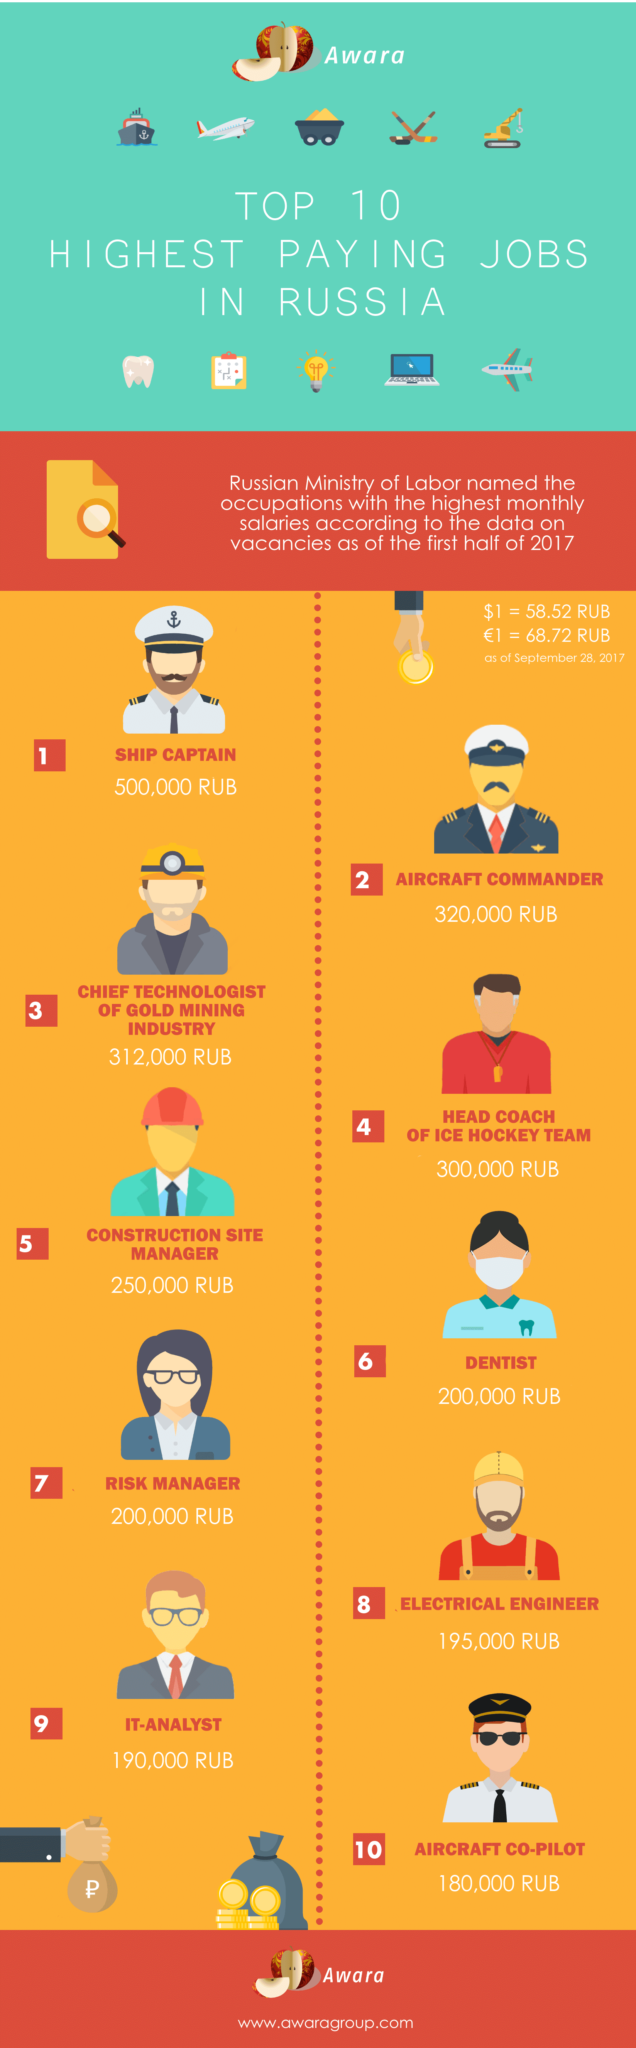 Top-10 Paying Jobs in Russia in